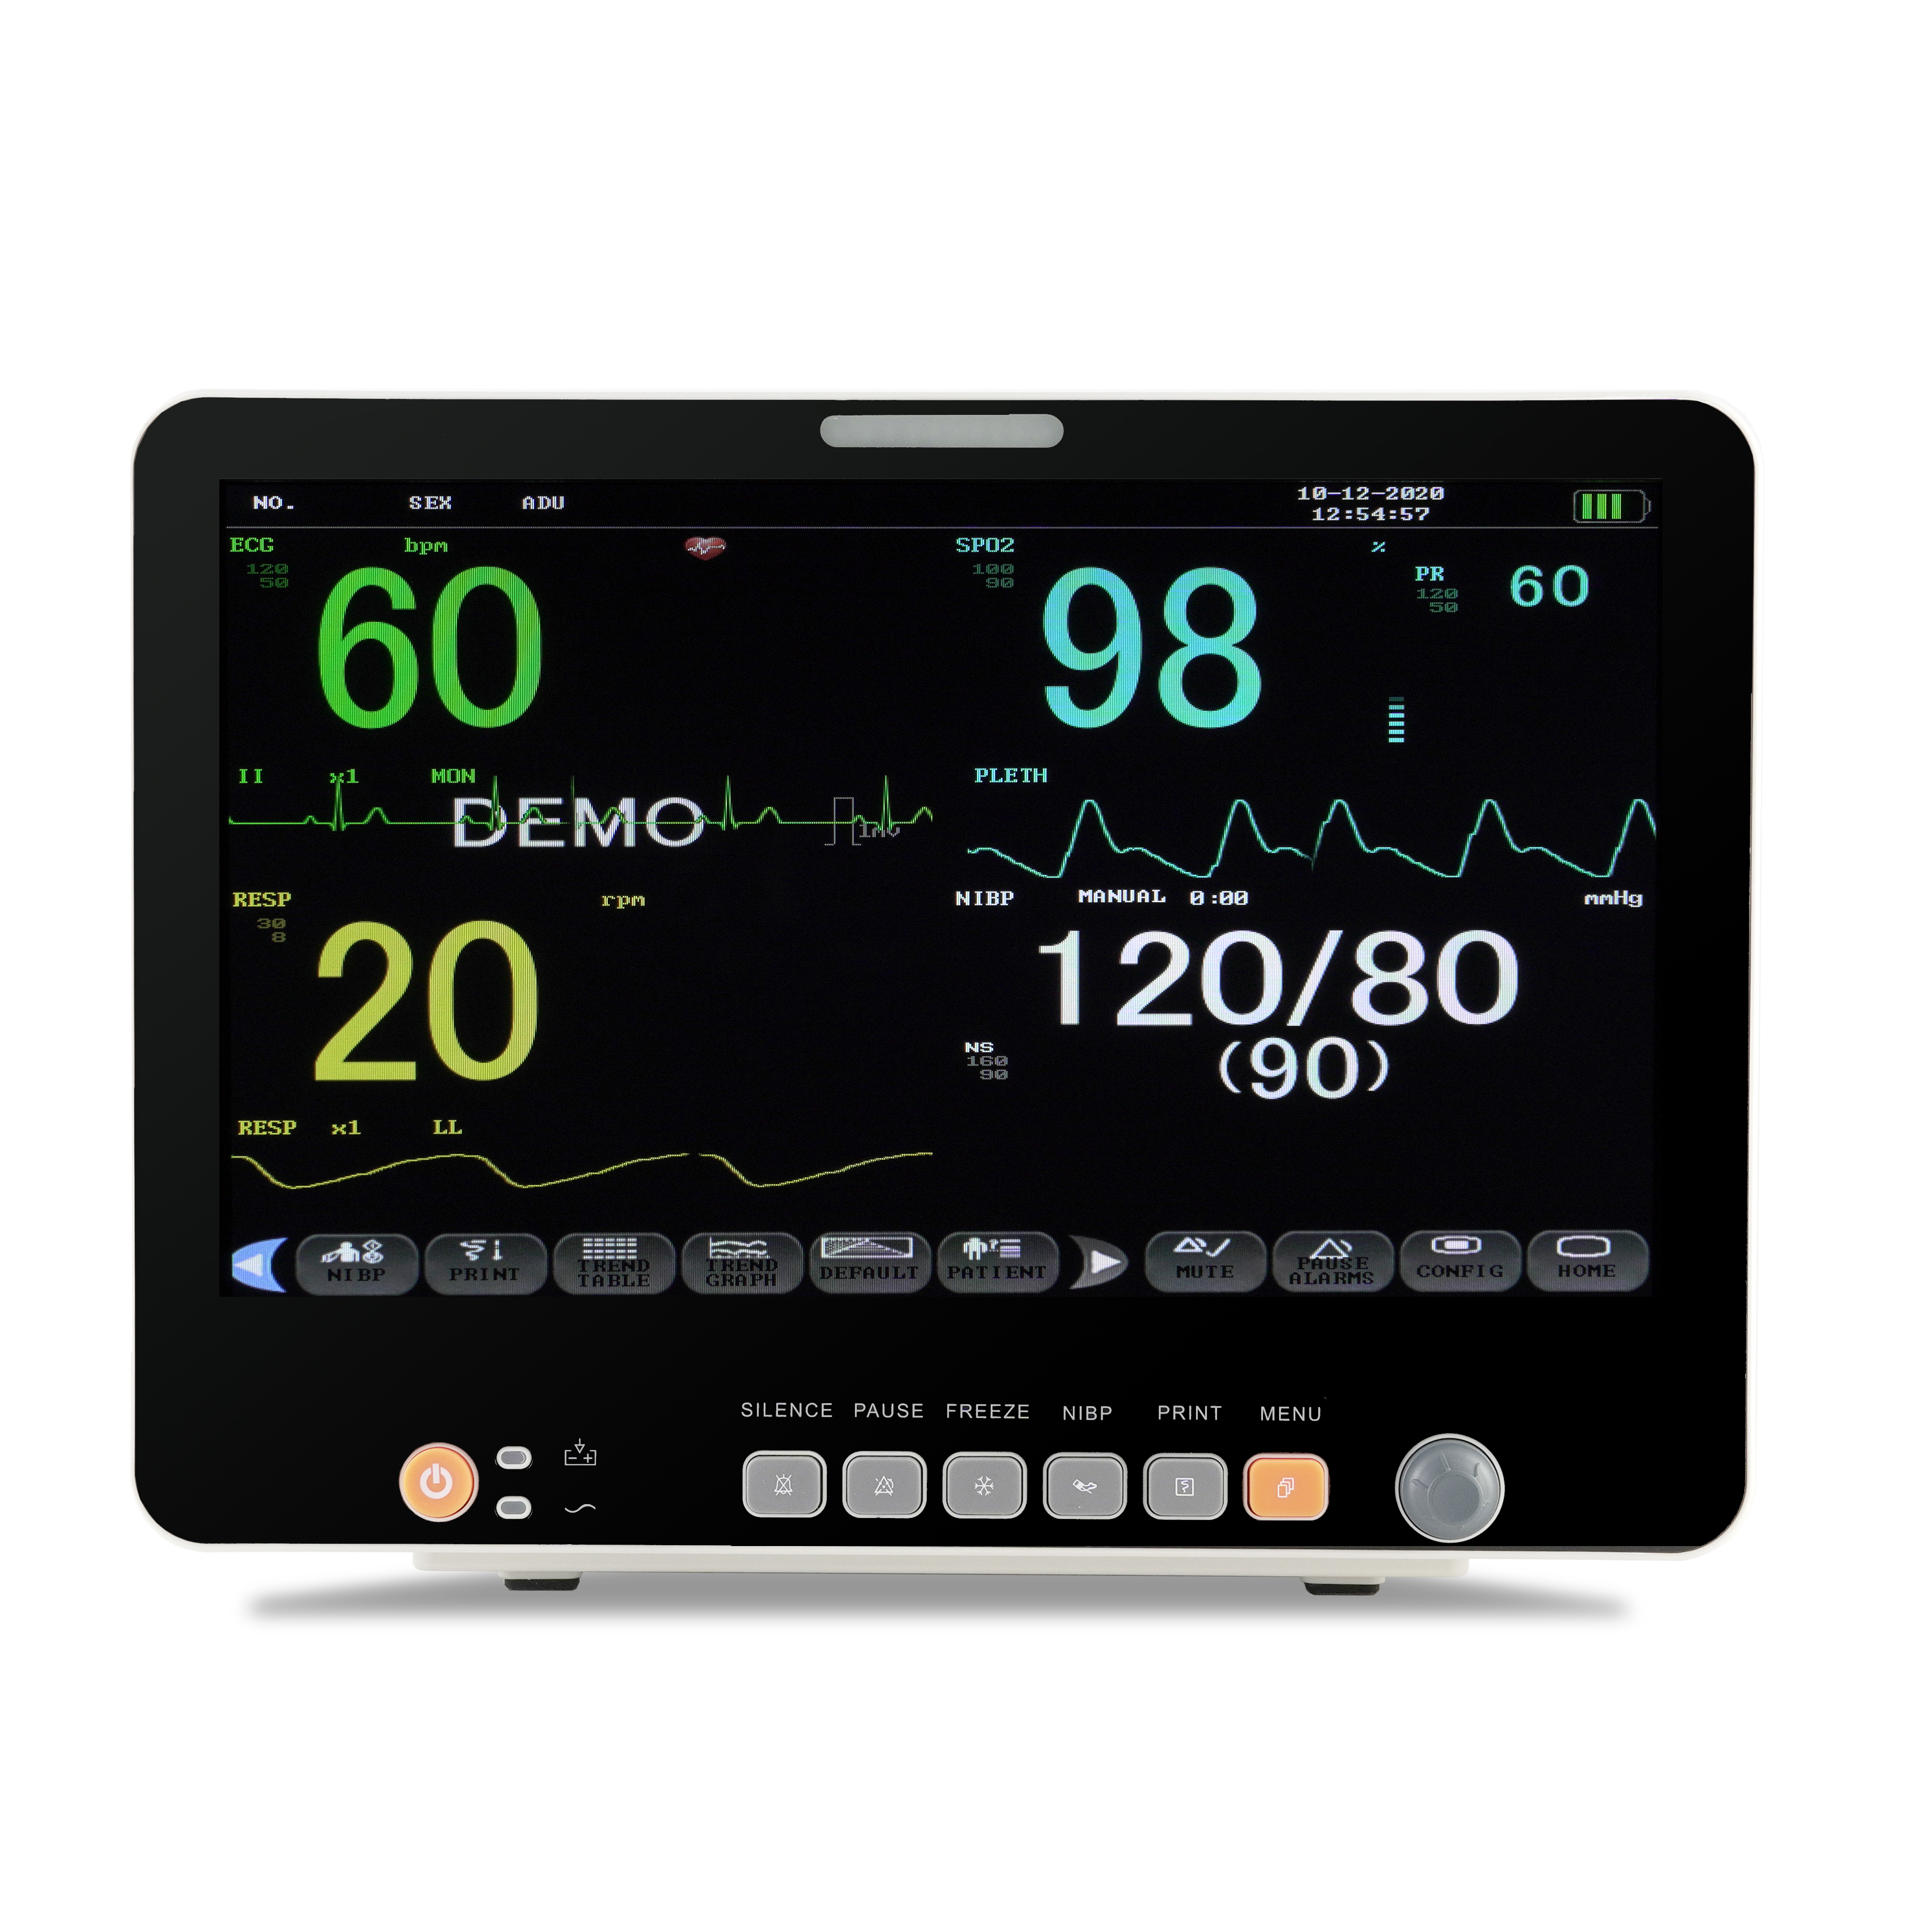 MS-8500B Multi-Parameter Patient Monitor 15.6Inches